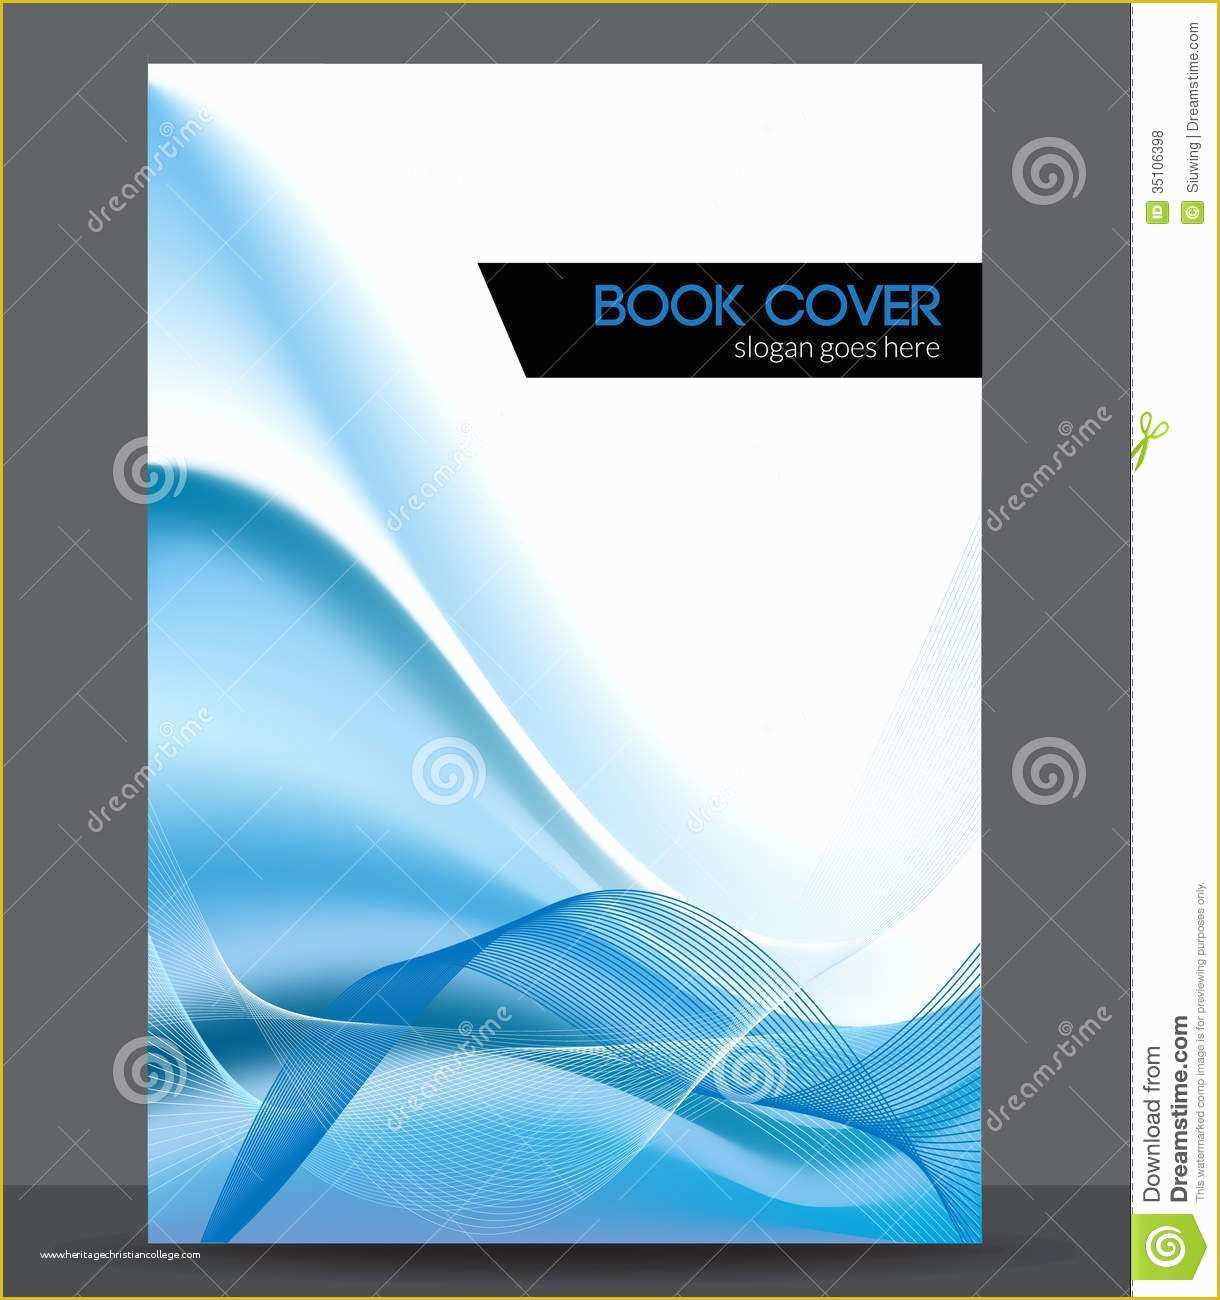 Free Booklet Design Templates Of Blue Wave Vector Brochure Booklet Cover Design T Stock